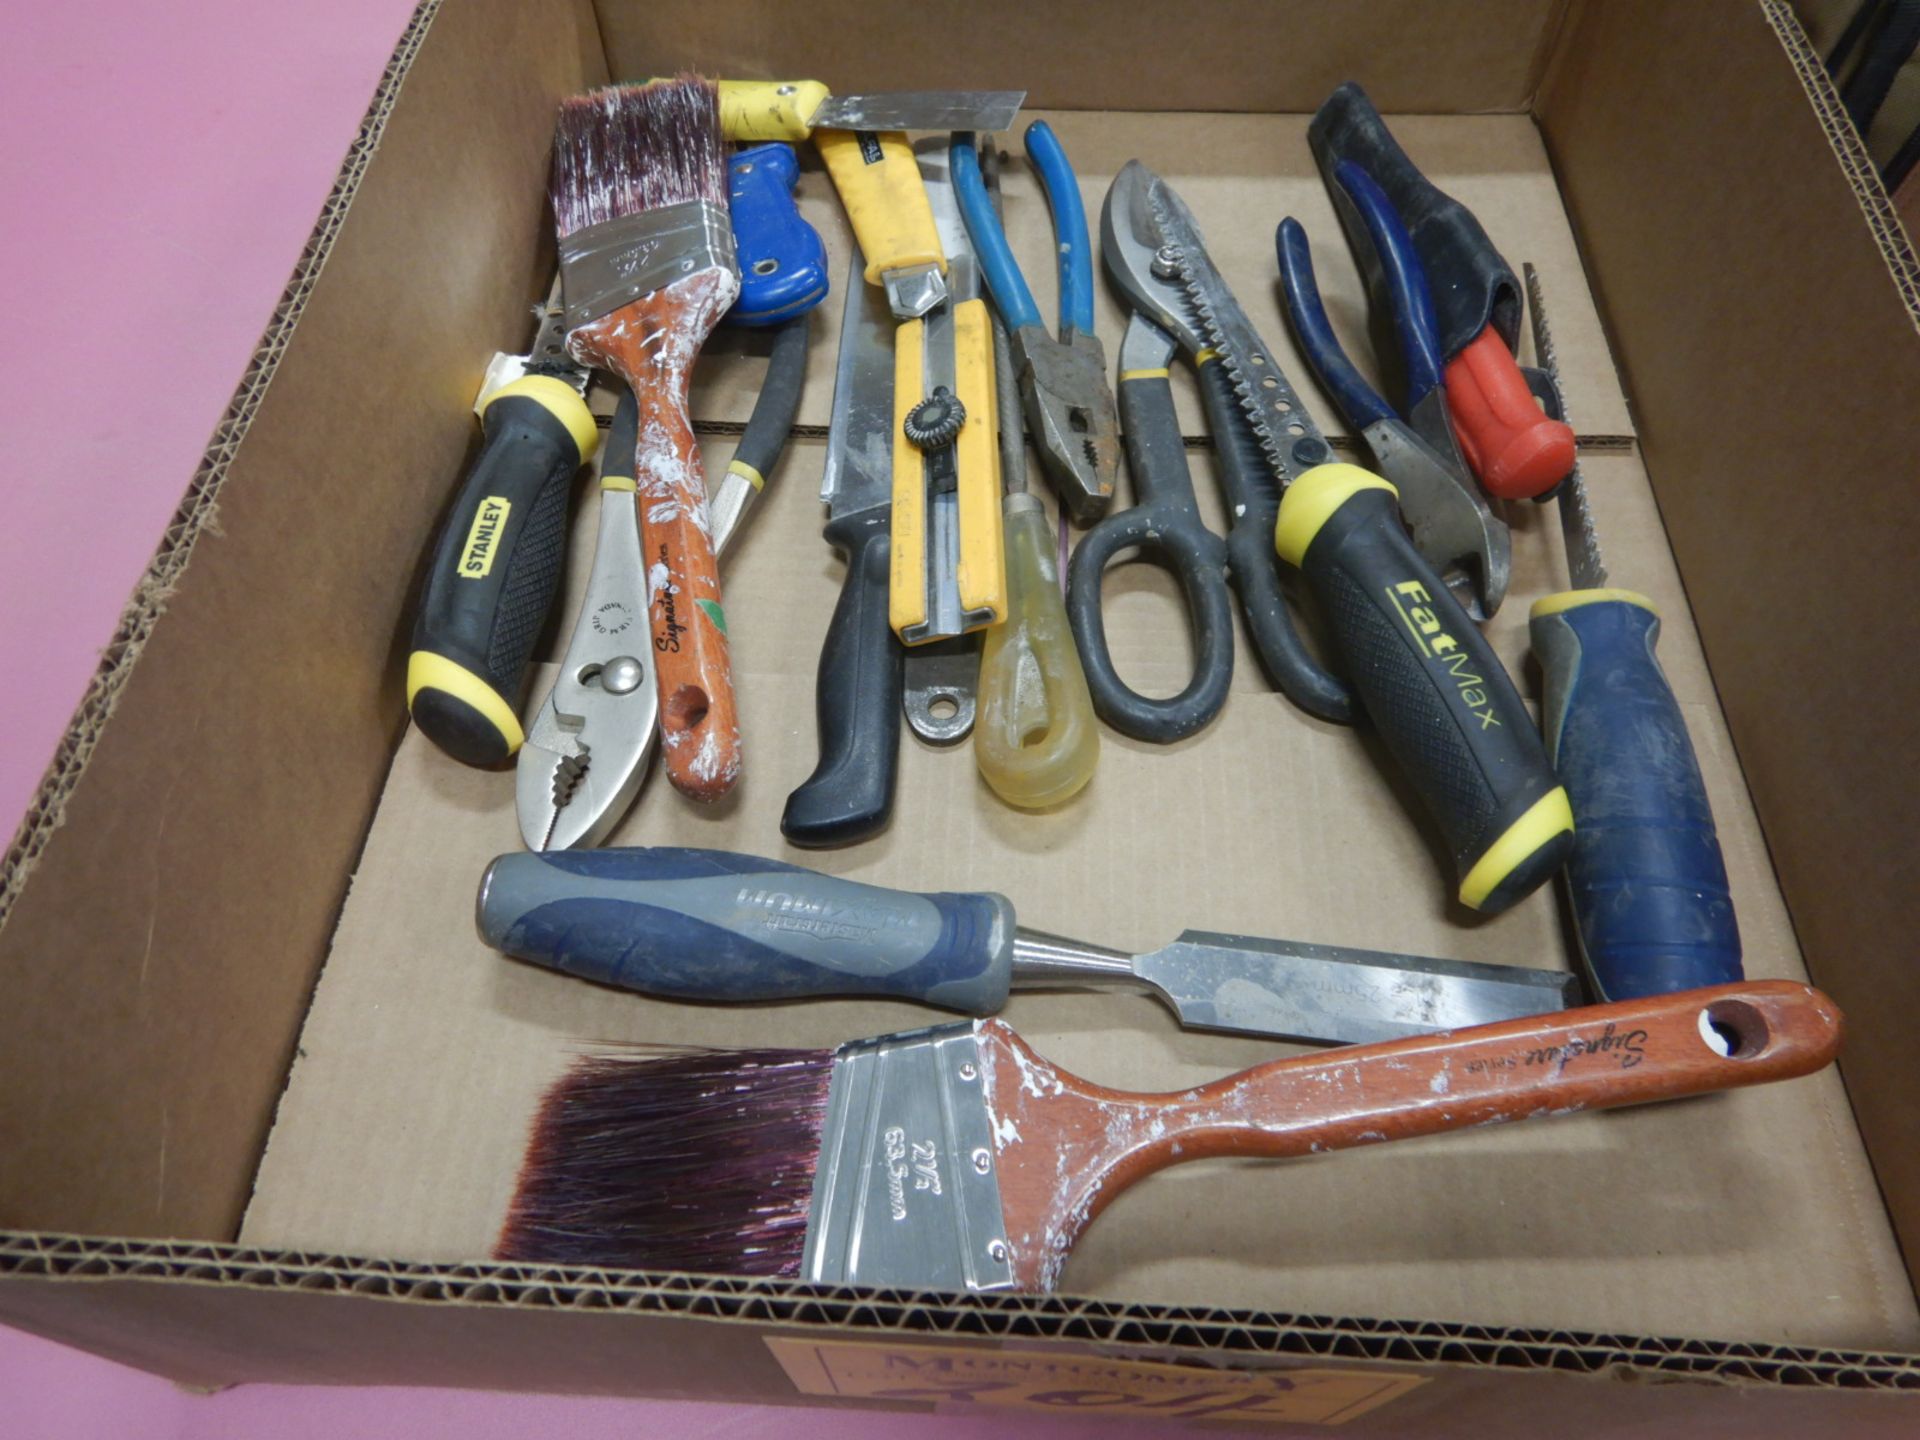 SCREW DRIVERS, PLYERS, DRYWALL SAW, & KUNYS TOOL - A33 - Image 3 of 4